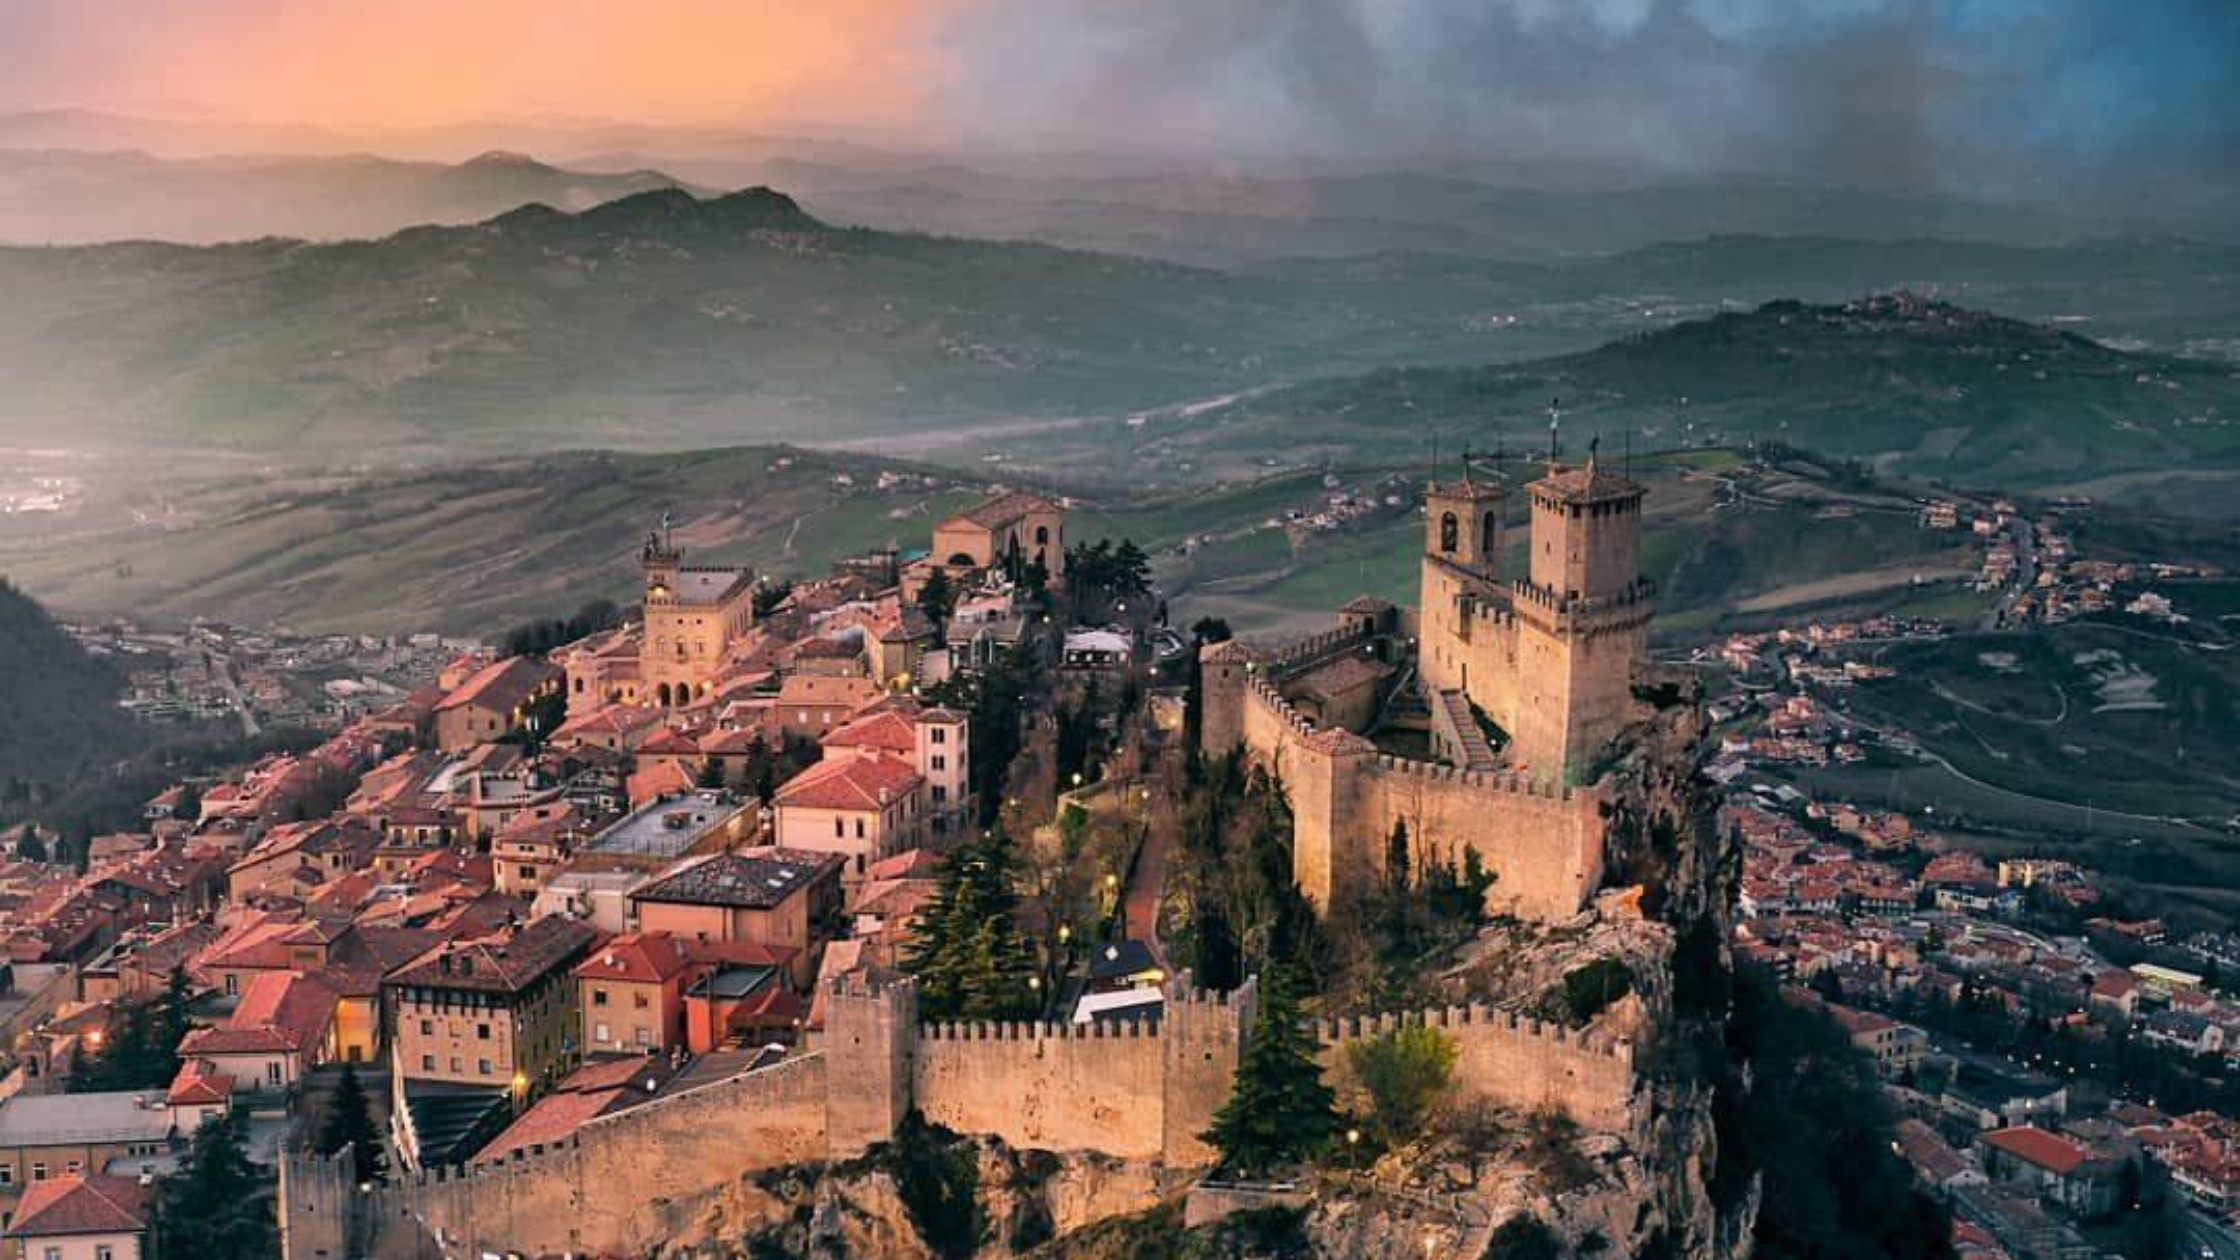 San Marino: The Other Small Country within Italy